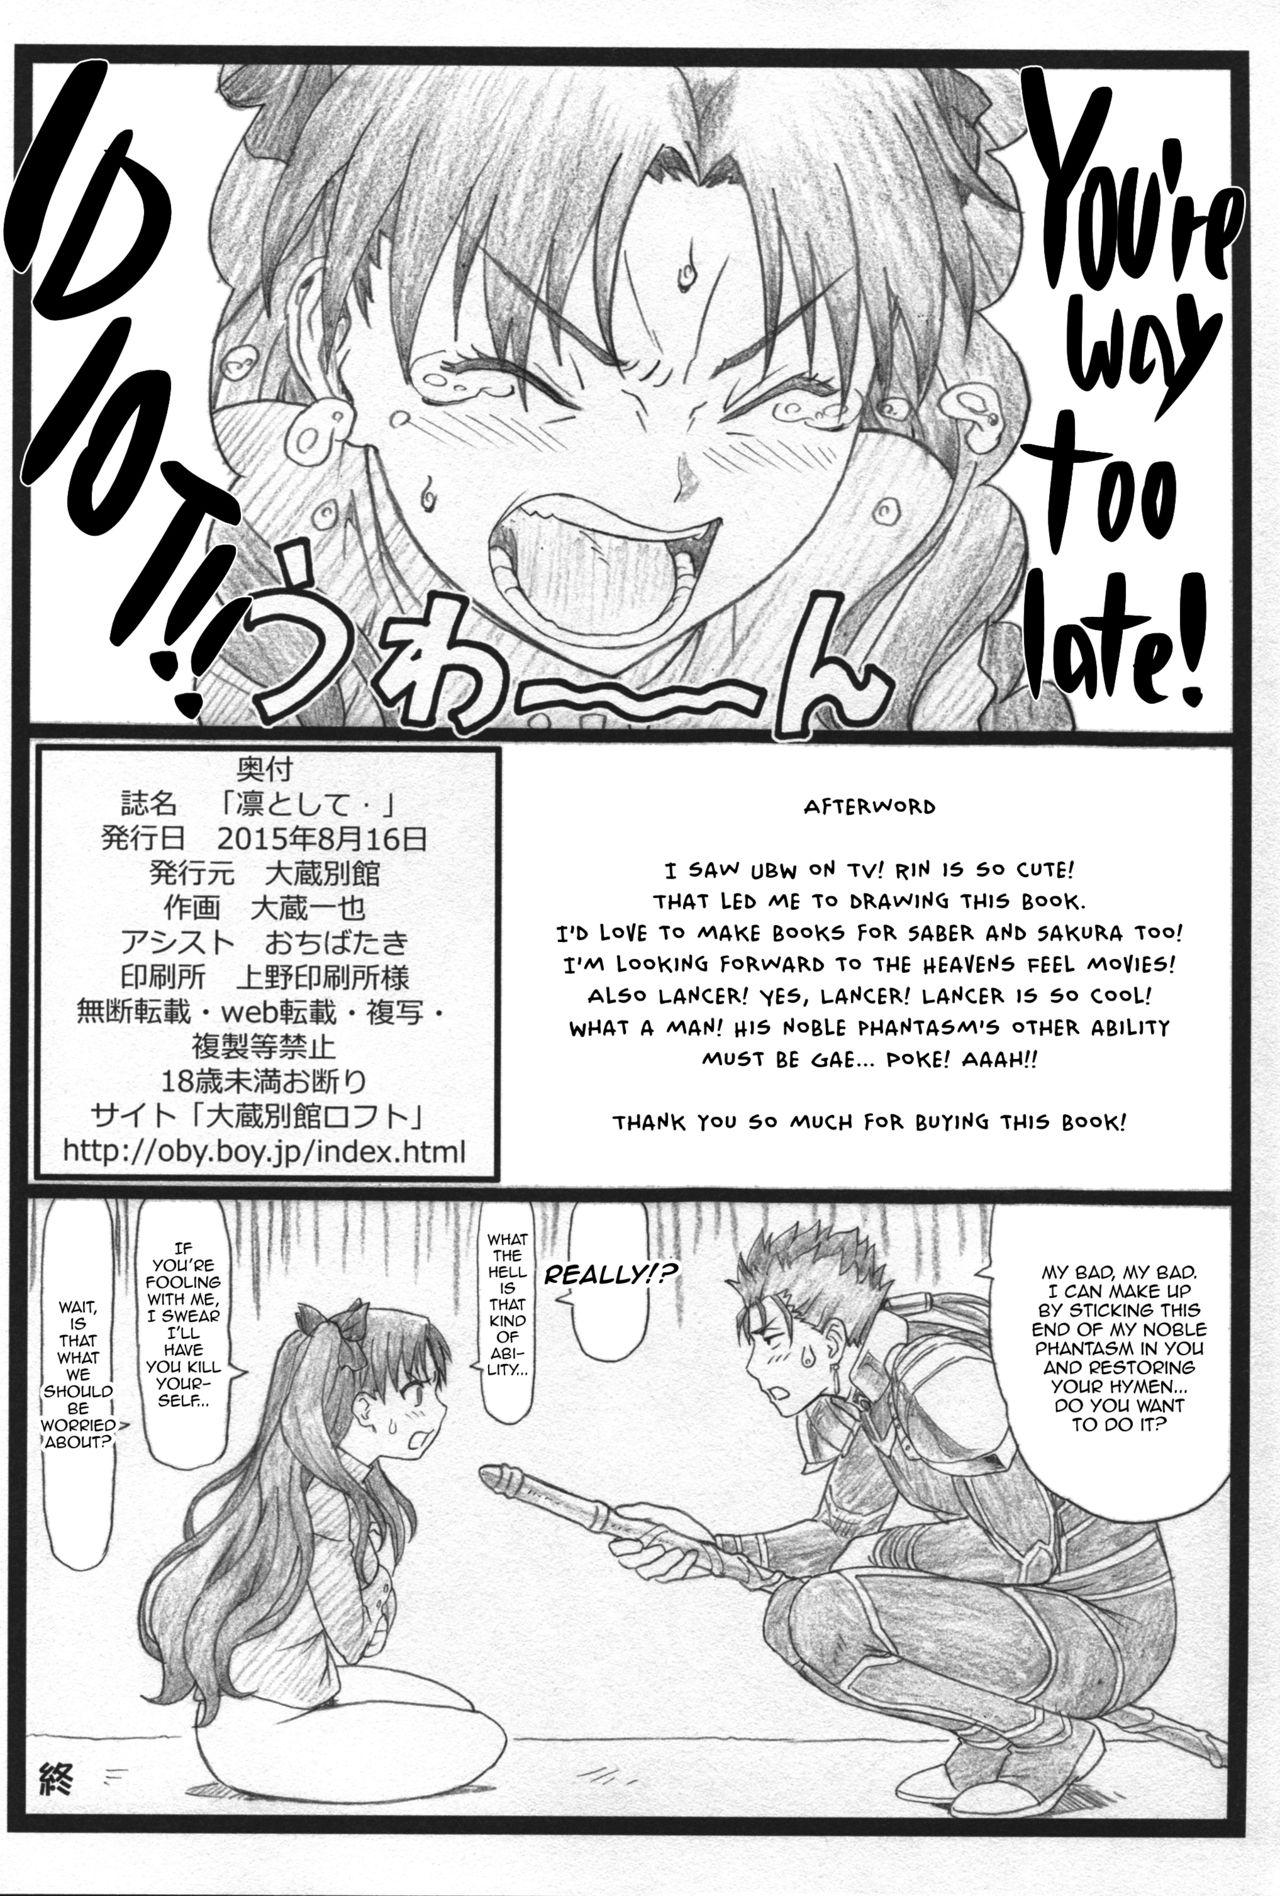 Tugging Rin to Shite... | With Rin... - Fate stay night Interracial Hardcore - Page 26